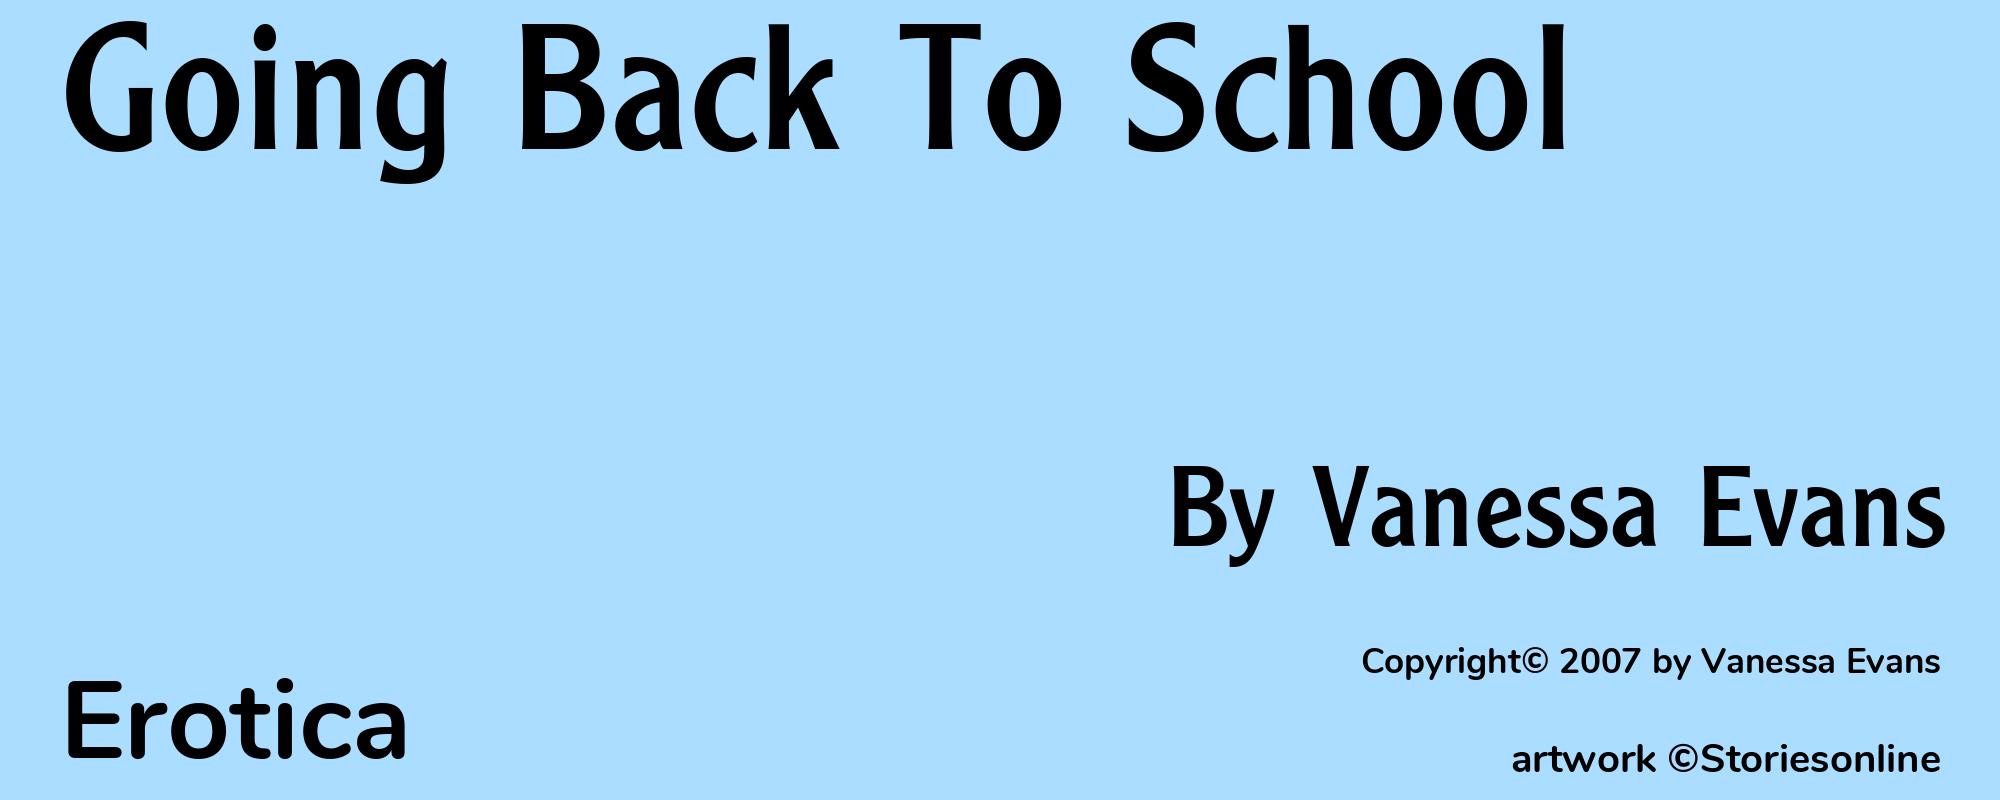 Going Back To School - Cover